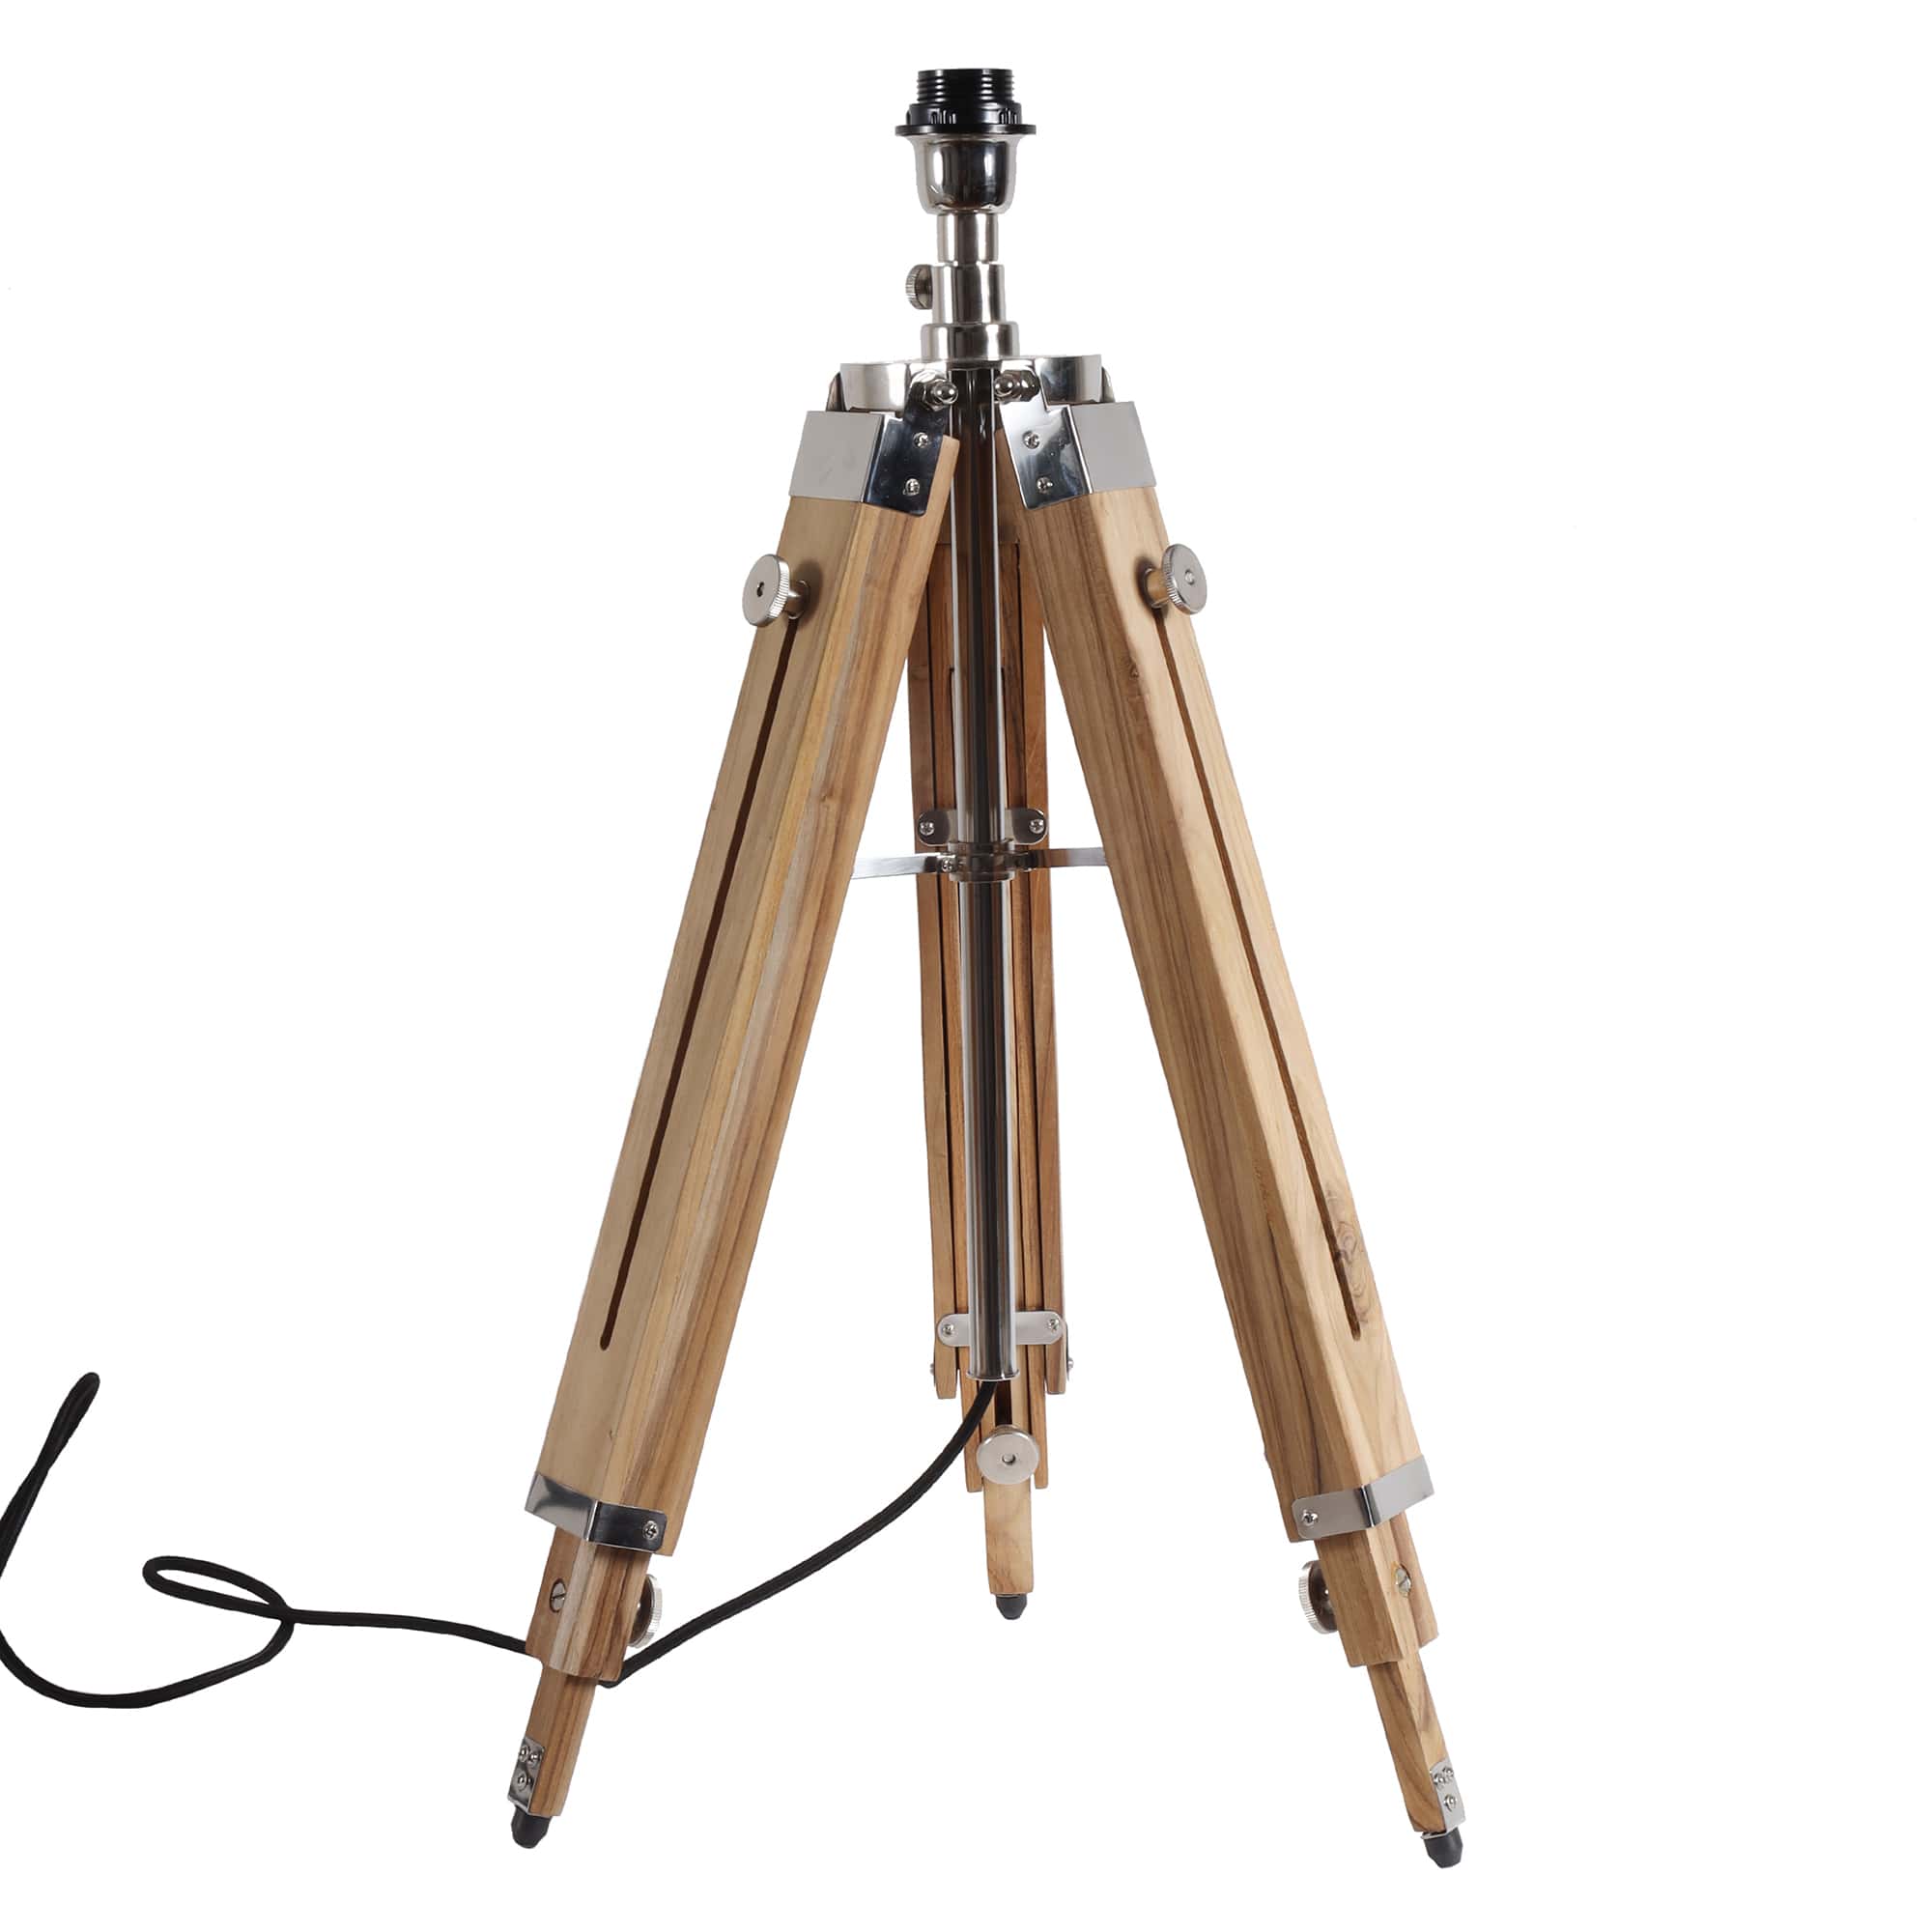 tripod floor lamp made from natural wood with nickel details. It has adjustable legs and neck which allows you to fully customise the height ,with legs on the smallest length